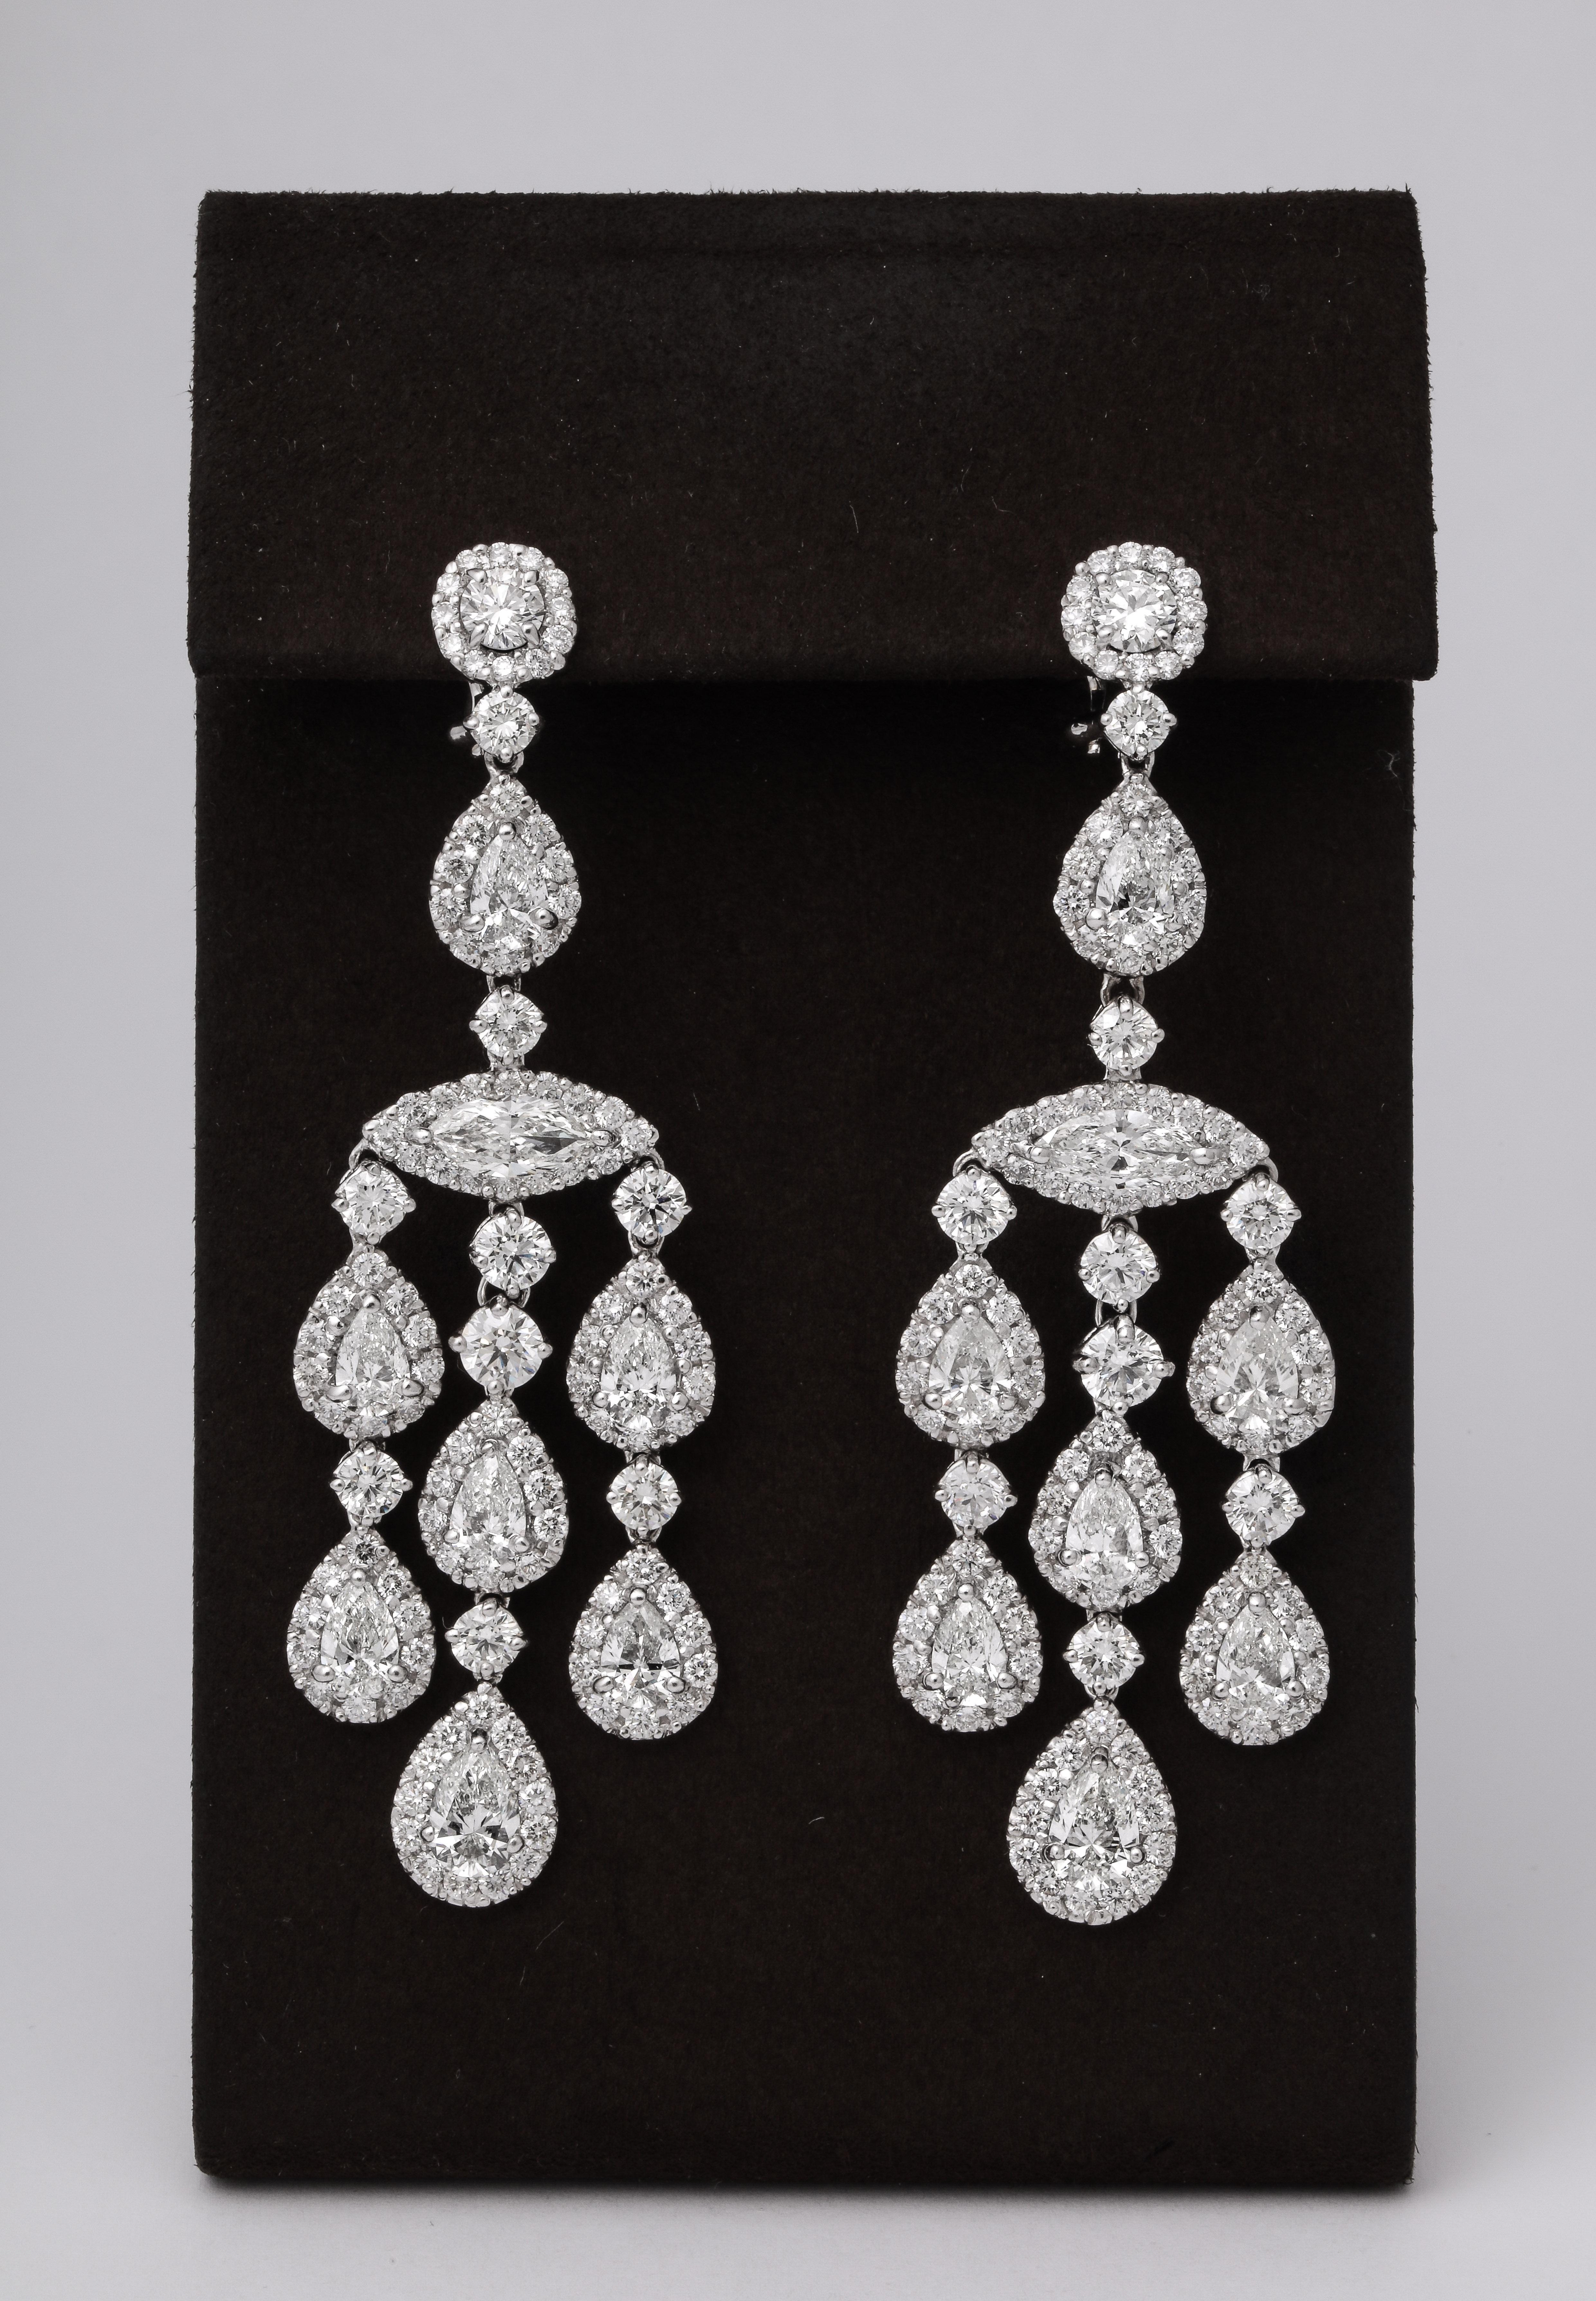 
23.14 carats of white round, pear shape and marquise diamonds set in 18k white gold.

Just over 3 inches in length, .80 inches wide.

A rich chandelier earring with great movement and sparkle!